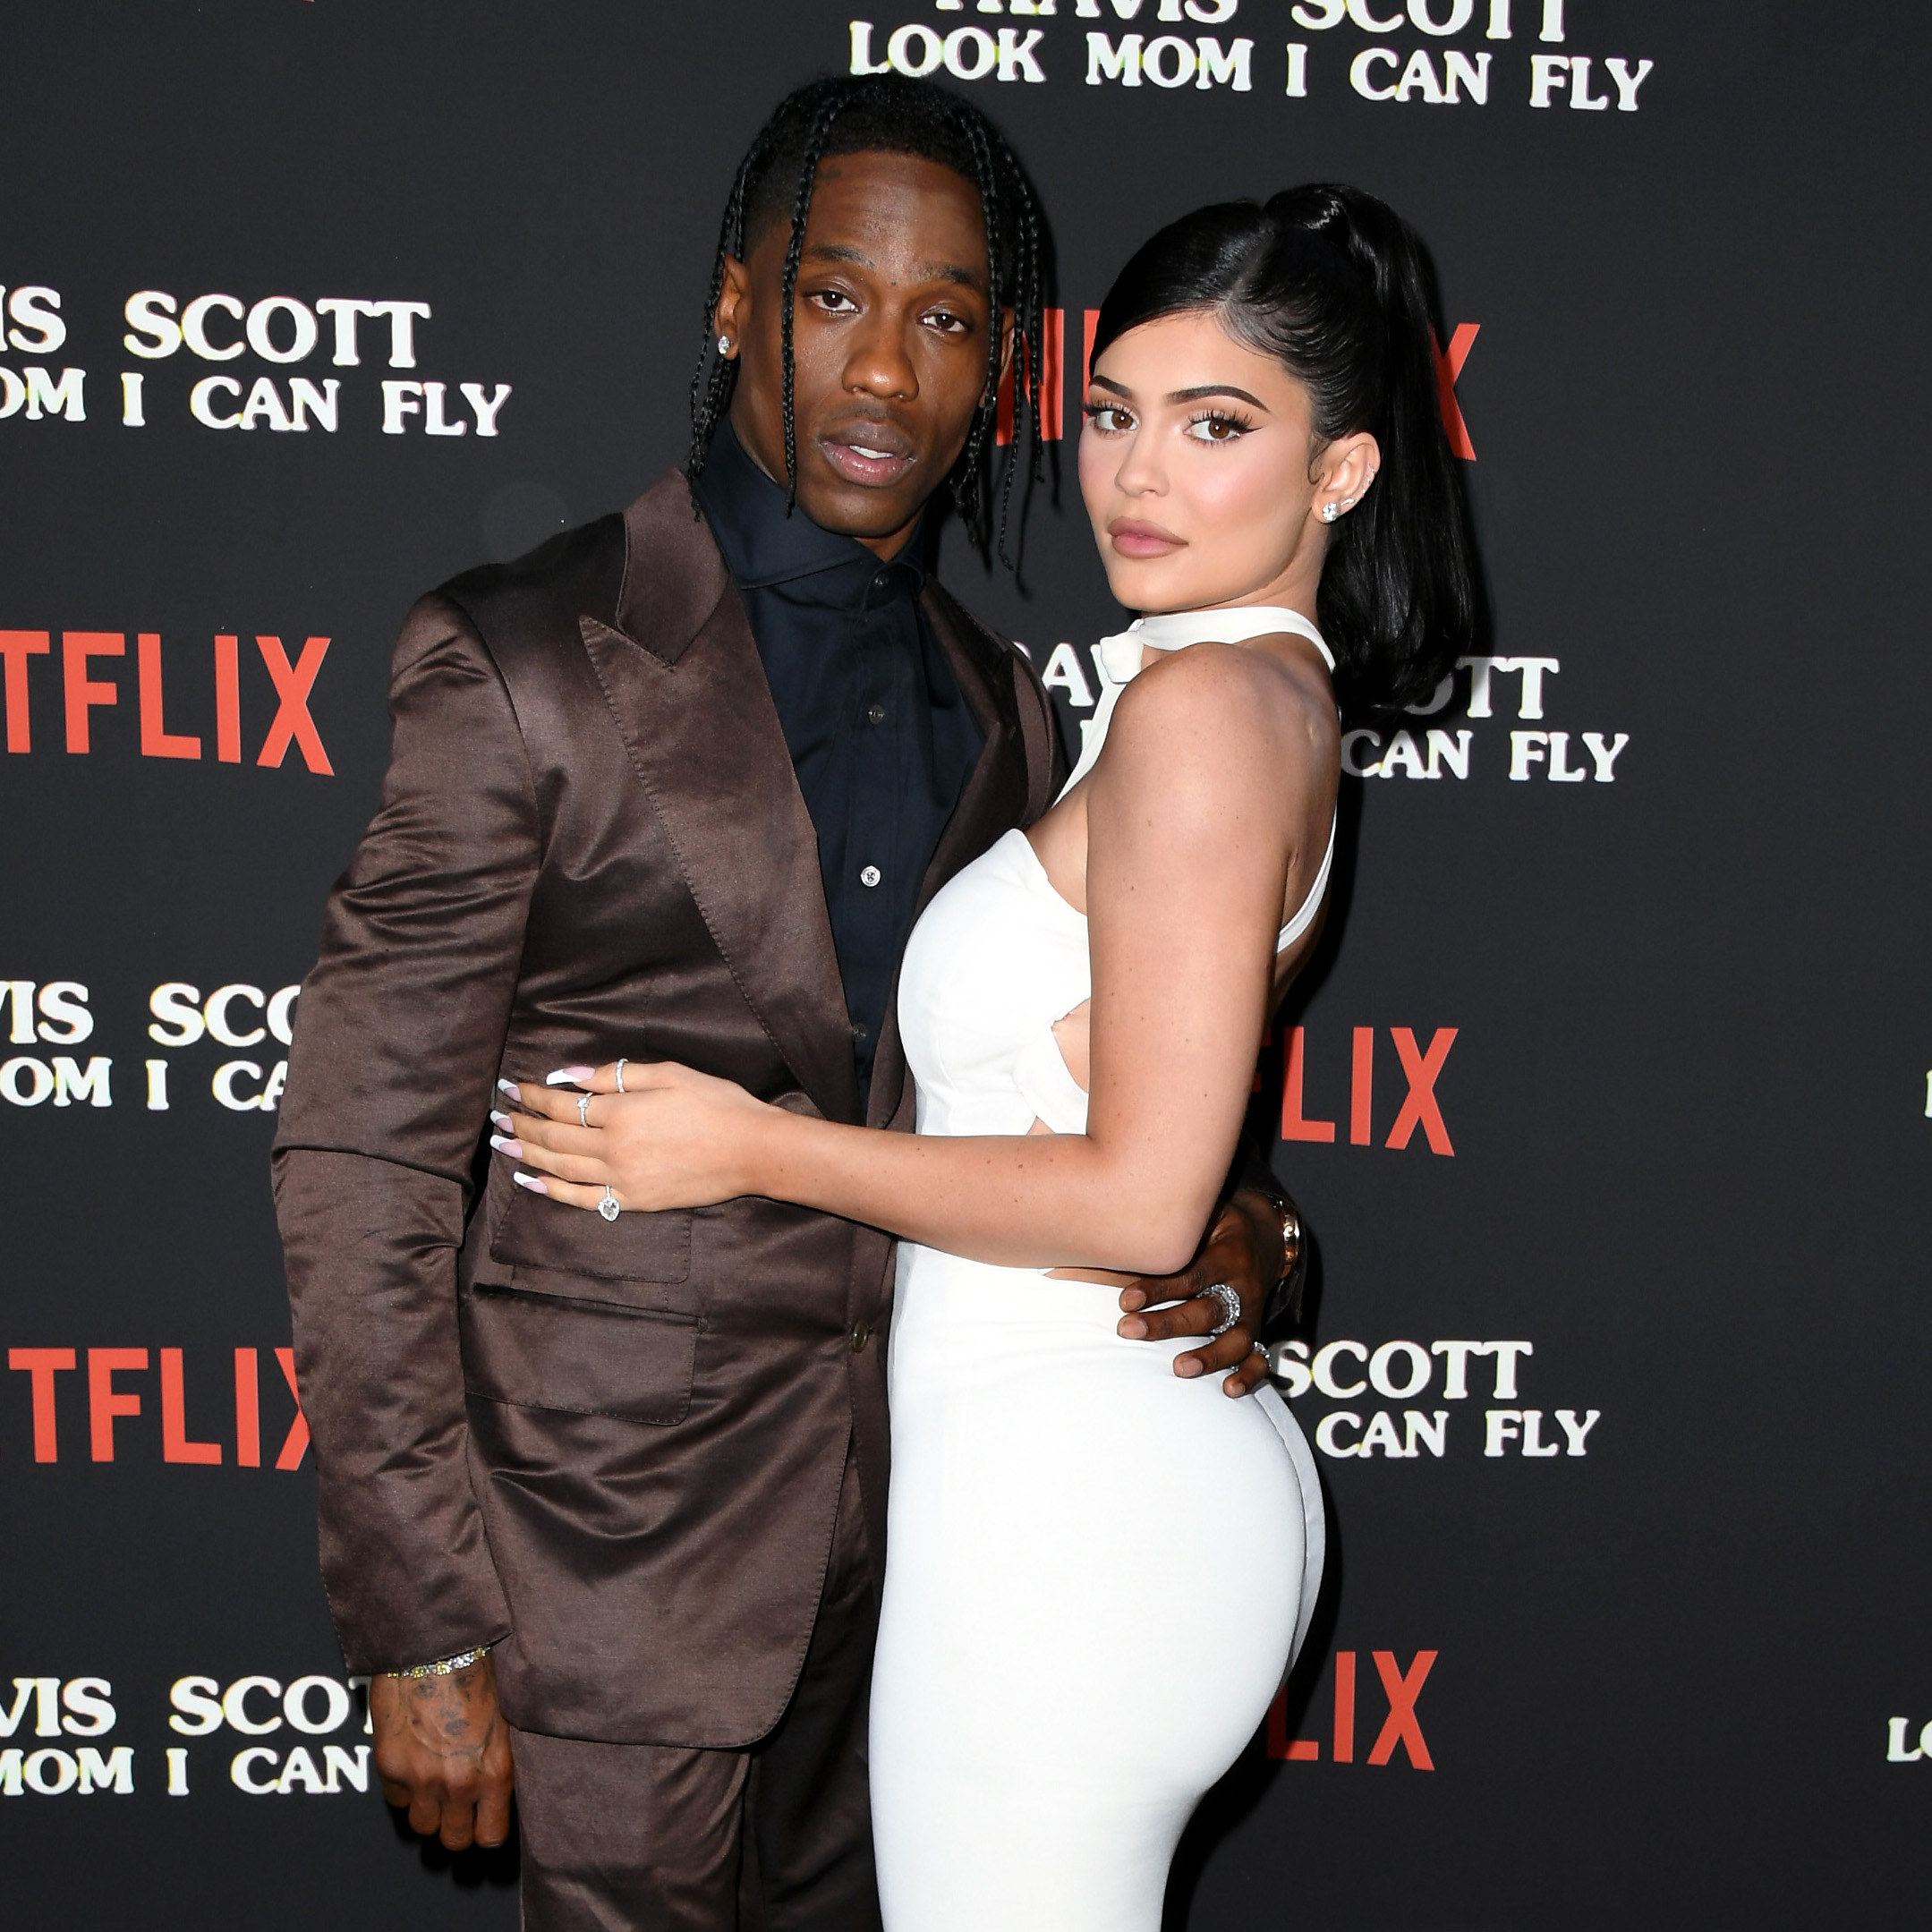 Travis and Kylie on the red carpet